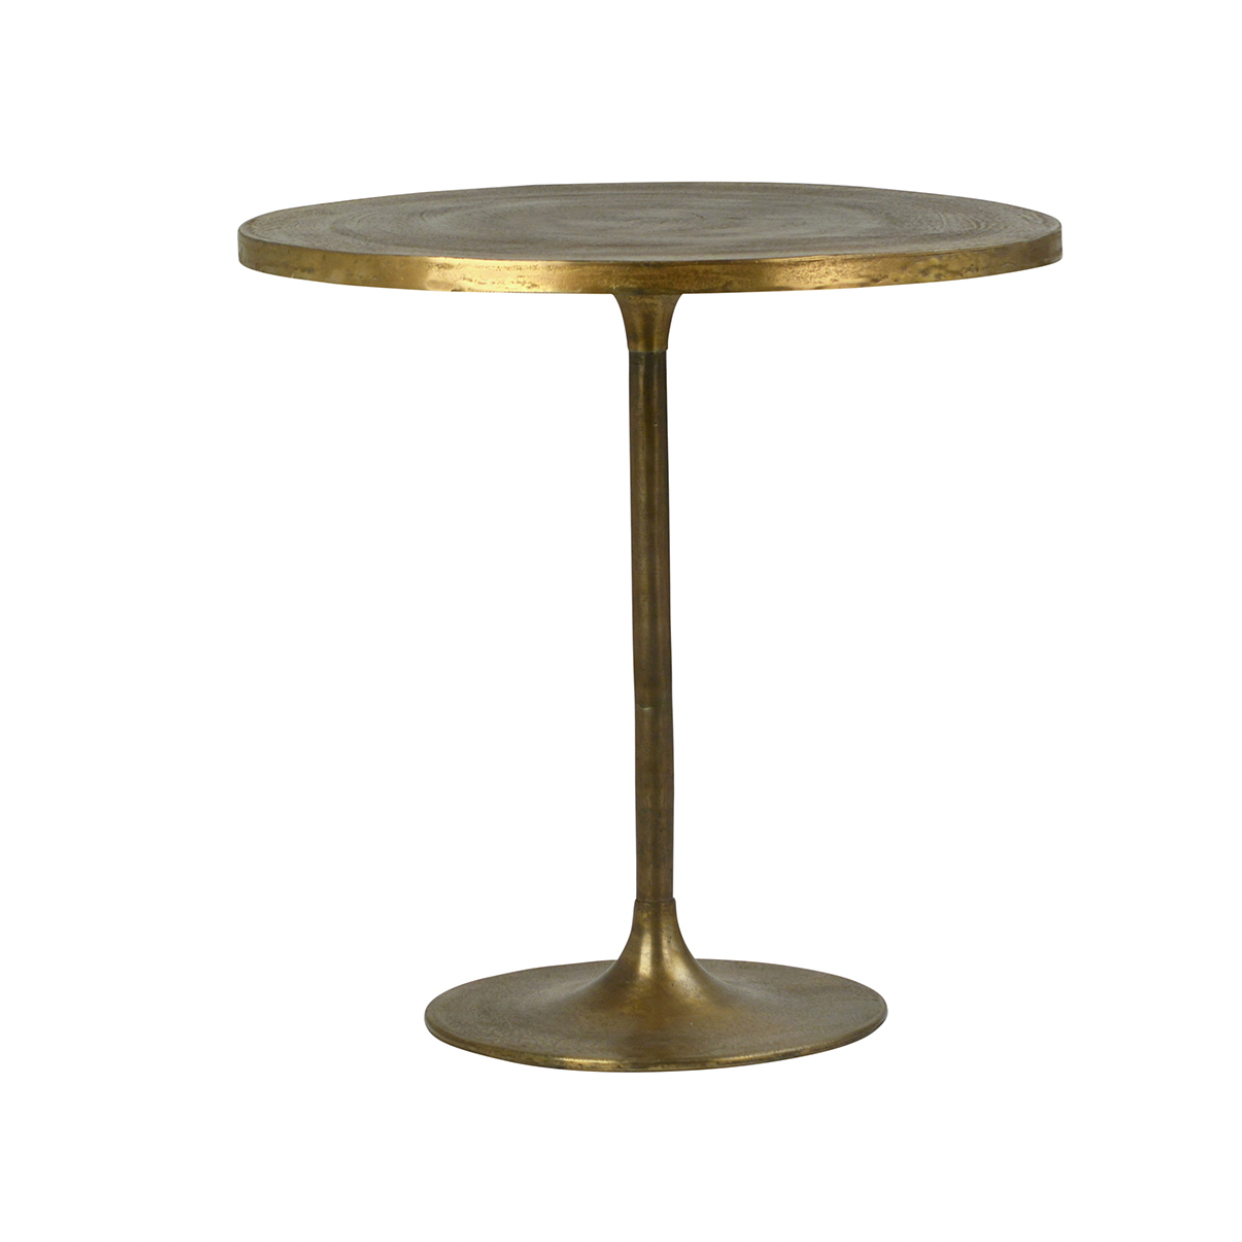 We love the antique feel the Heviz Bistro Table gives to a room. This bistro style dining table is perfectly sized for a cozy nook.  ALUMINUM, BRASS ANTIQUE TOP THICKNESS 1